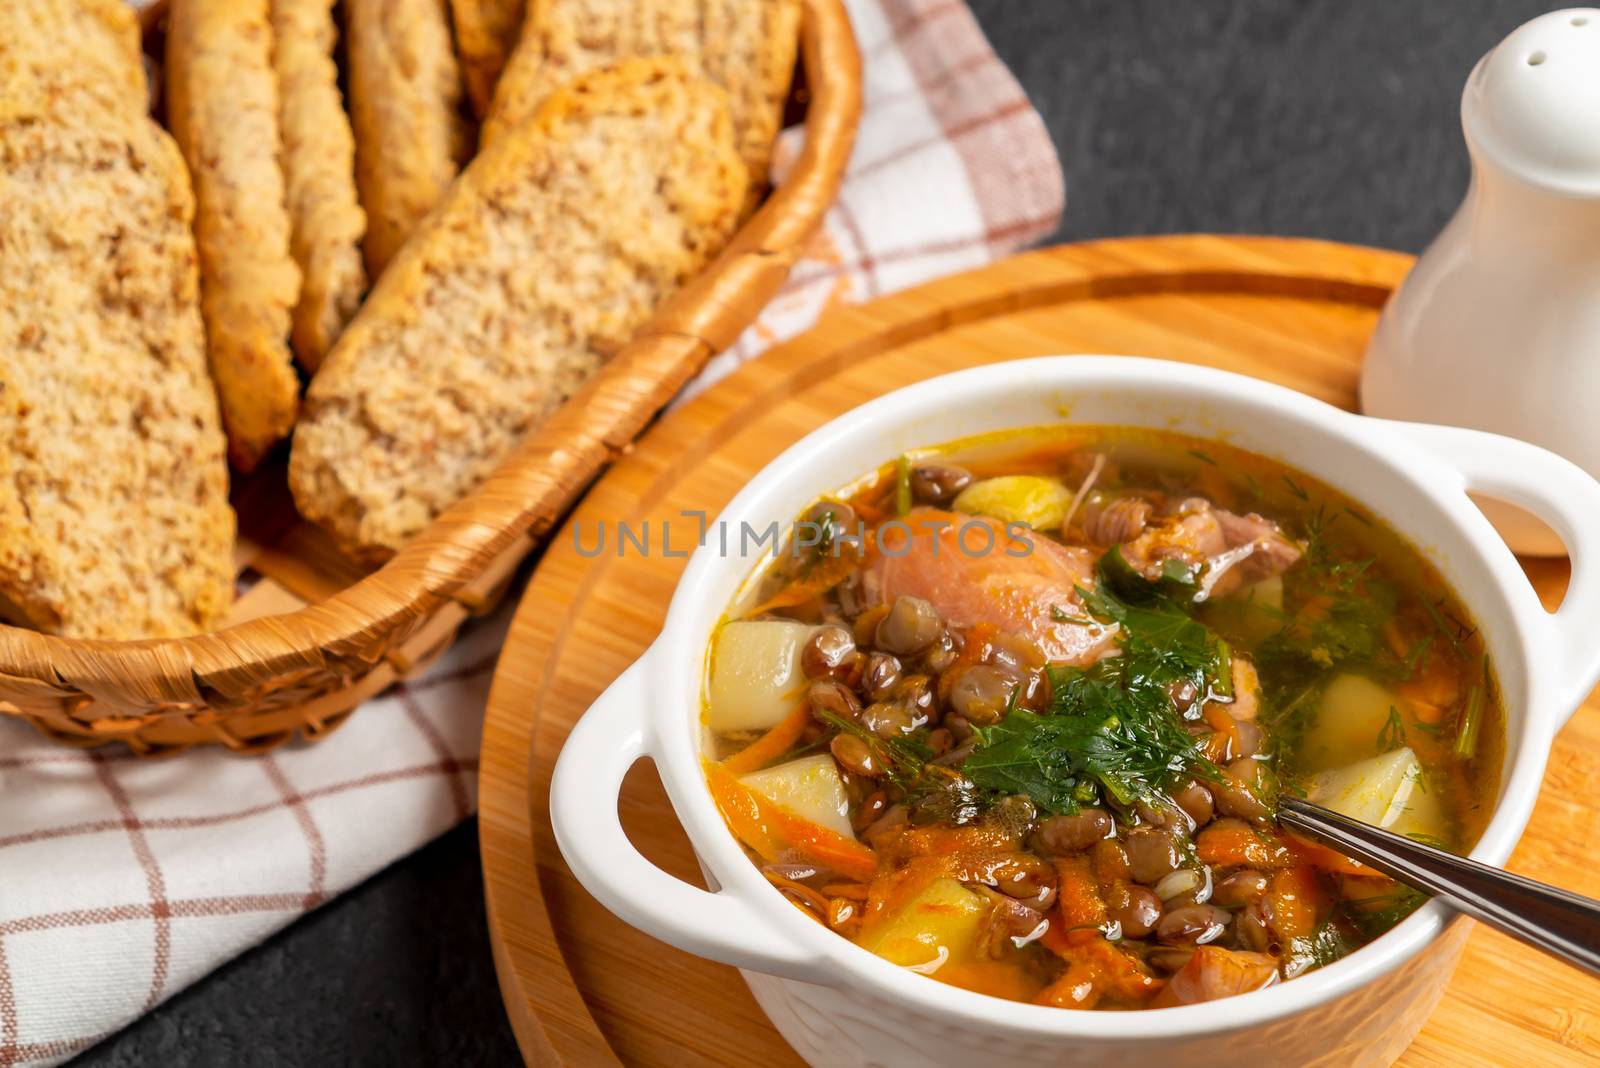 Lentil soup with chicken in a white bowl on a wooden board on a black table.